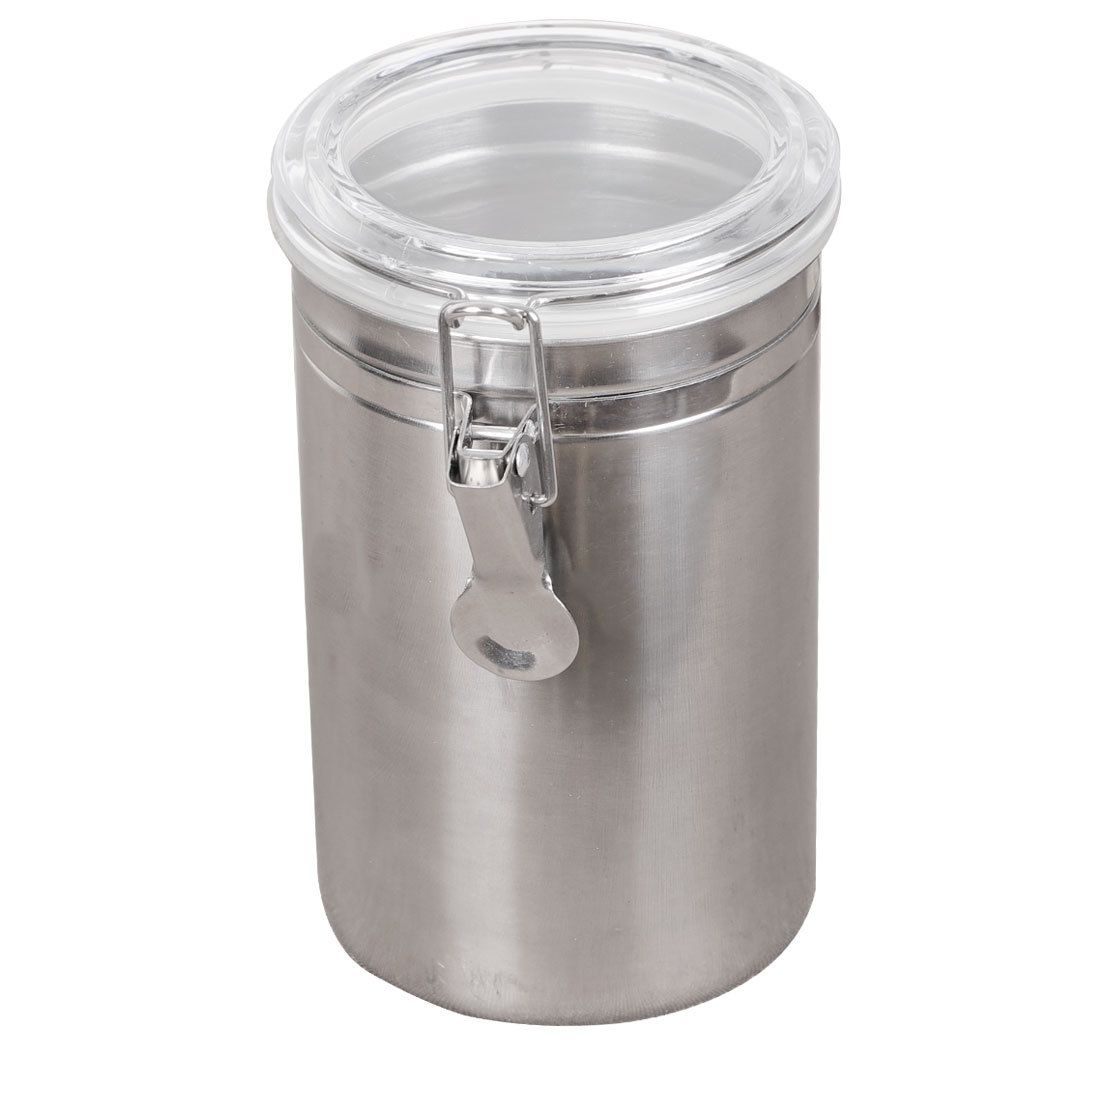 Brentwood 0.5 Liter Double Wall Stainless Steel Food Jar